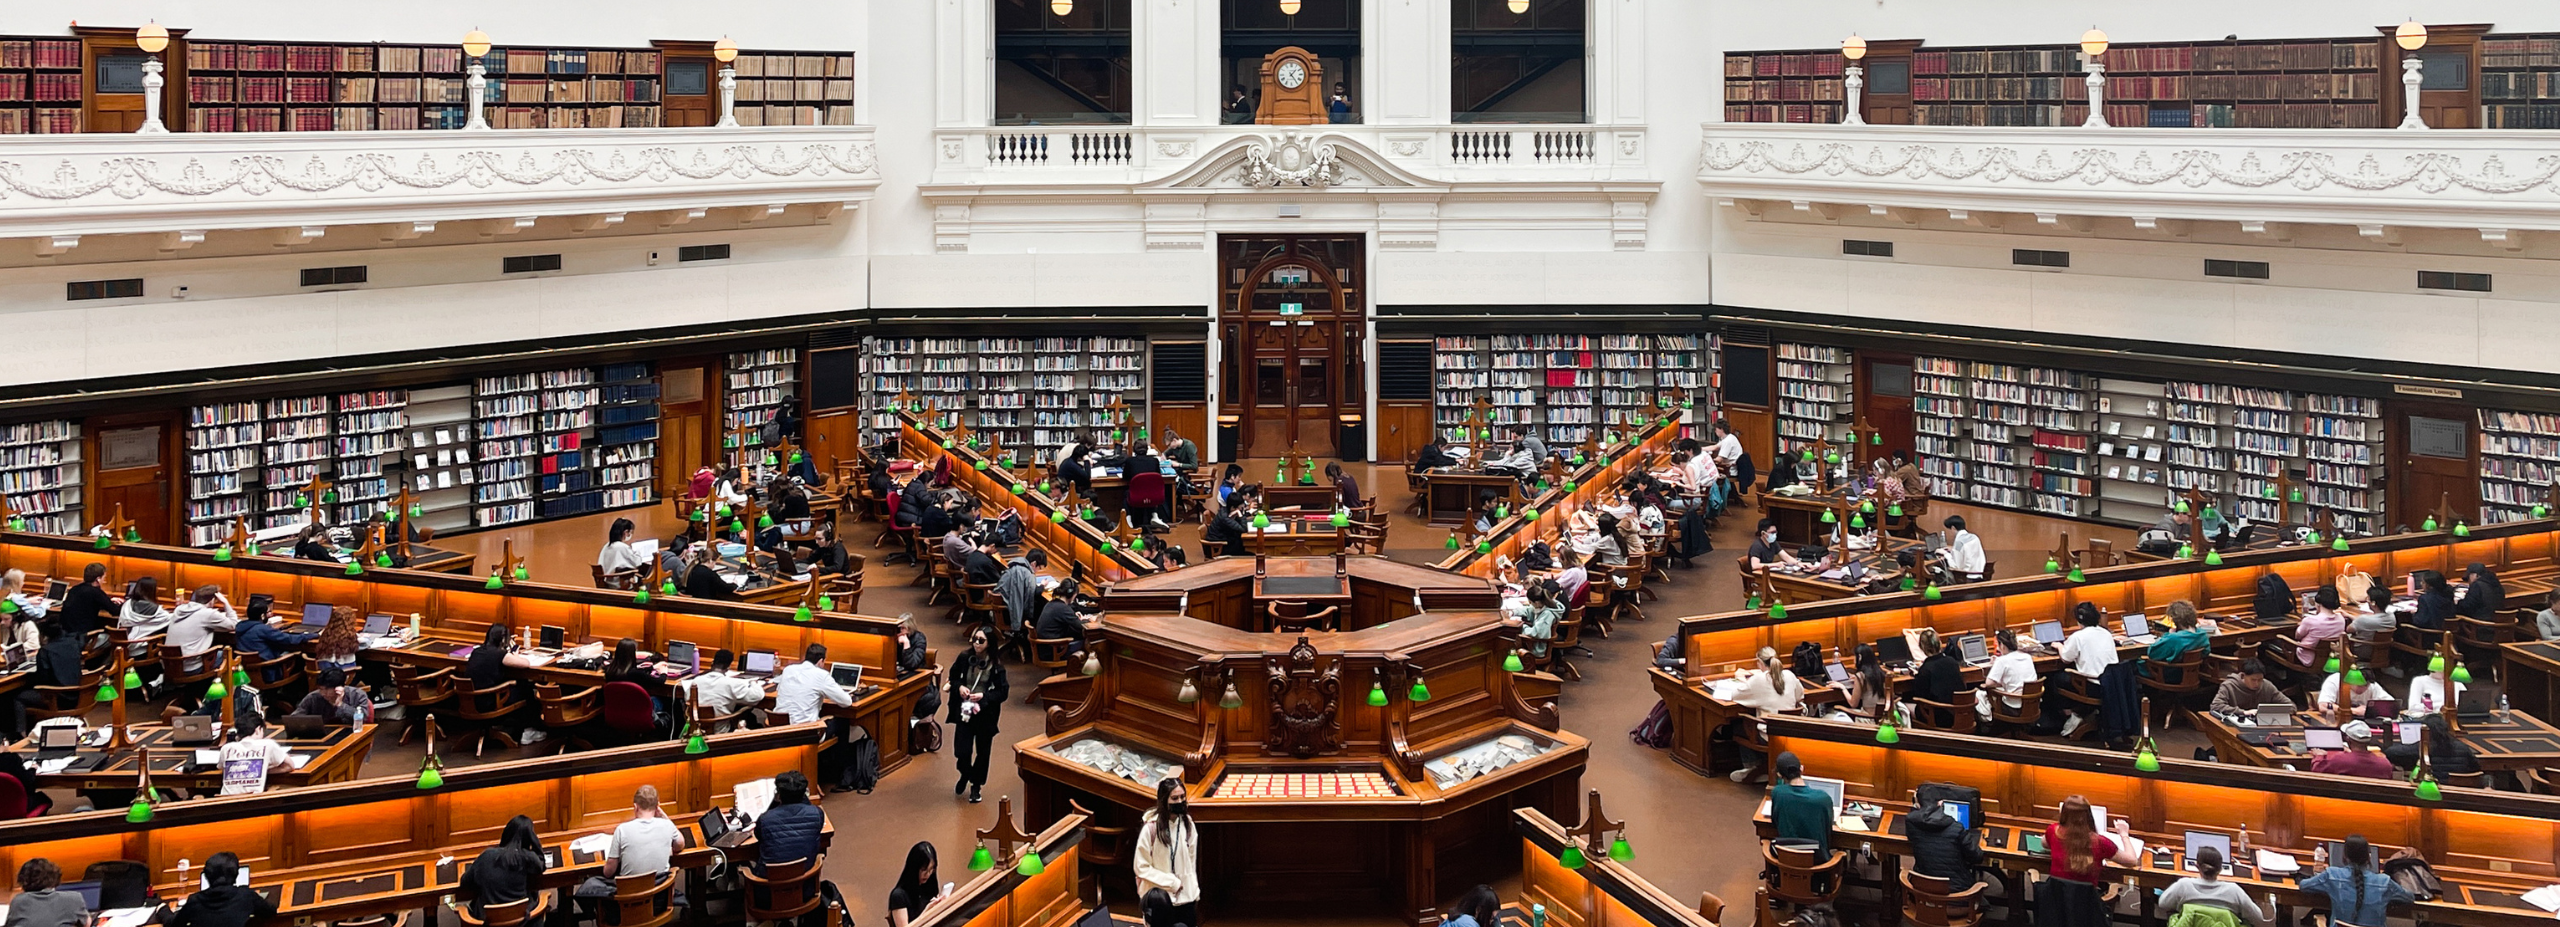 A wide-angle shot of the reading room in the State Library of Victoria which shows the angular desks and central catalogue desk in an artful geometric pattern.